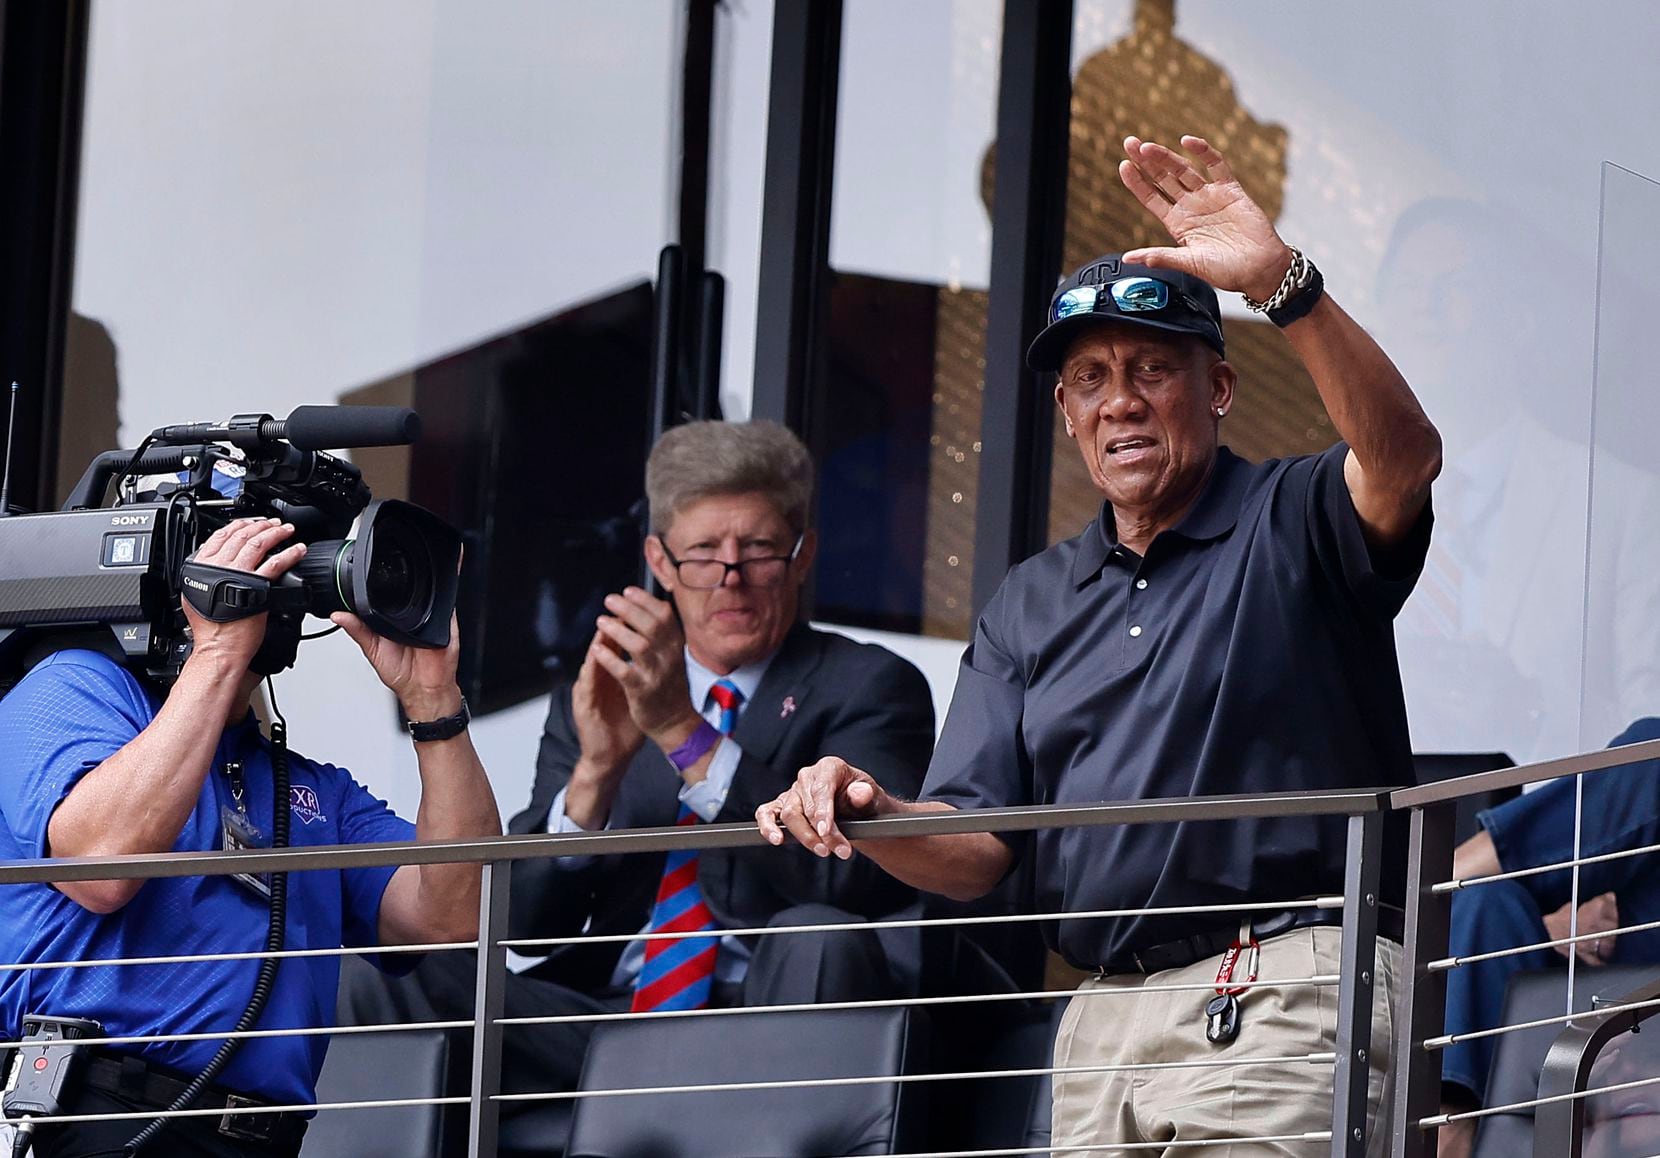 Former Texas Ranger Ferguson Jenkins is introduced to a near sell-out crowd during pregame ceremonies at Globe Life Field in Arlington, Monday, April 5, 2021. The Texas Rangers were facing the Toronto Blue Jays in their home opener. (Tom Fox/The Dallas Morning News)